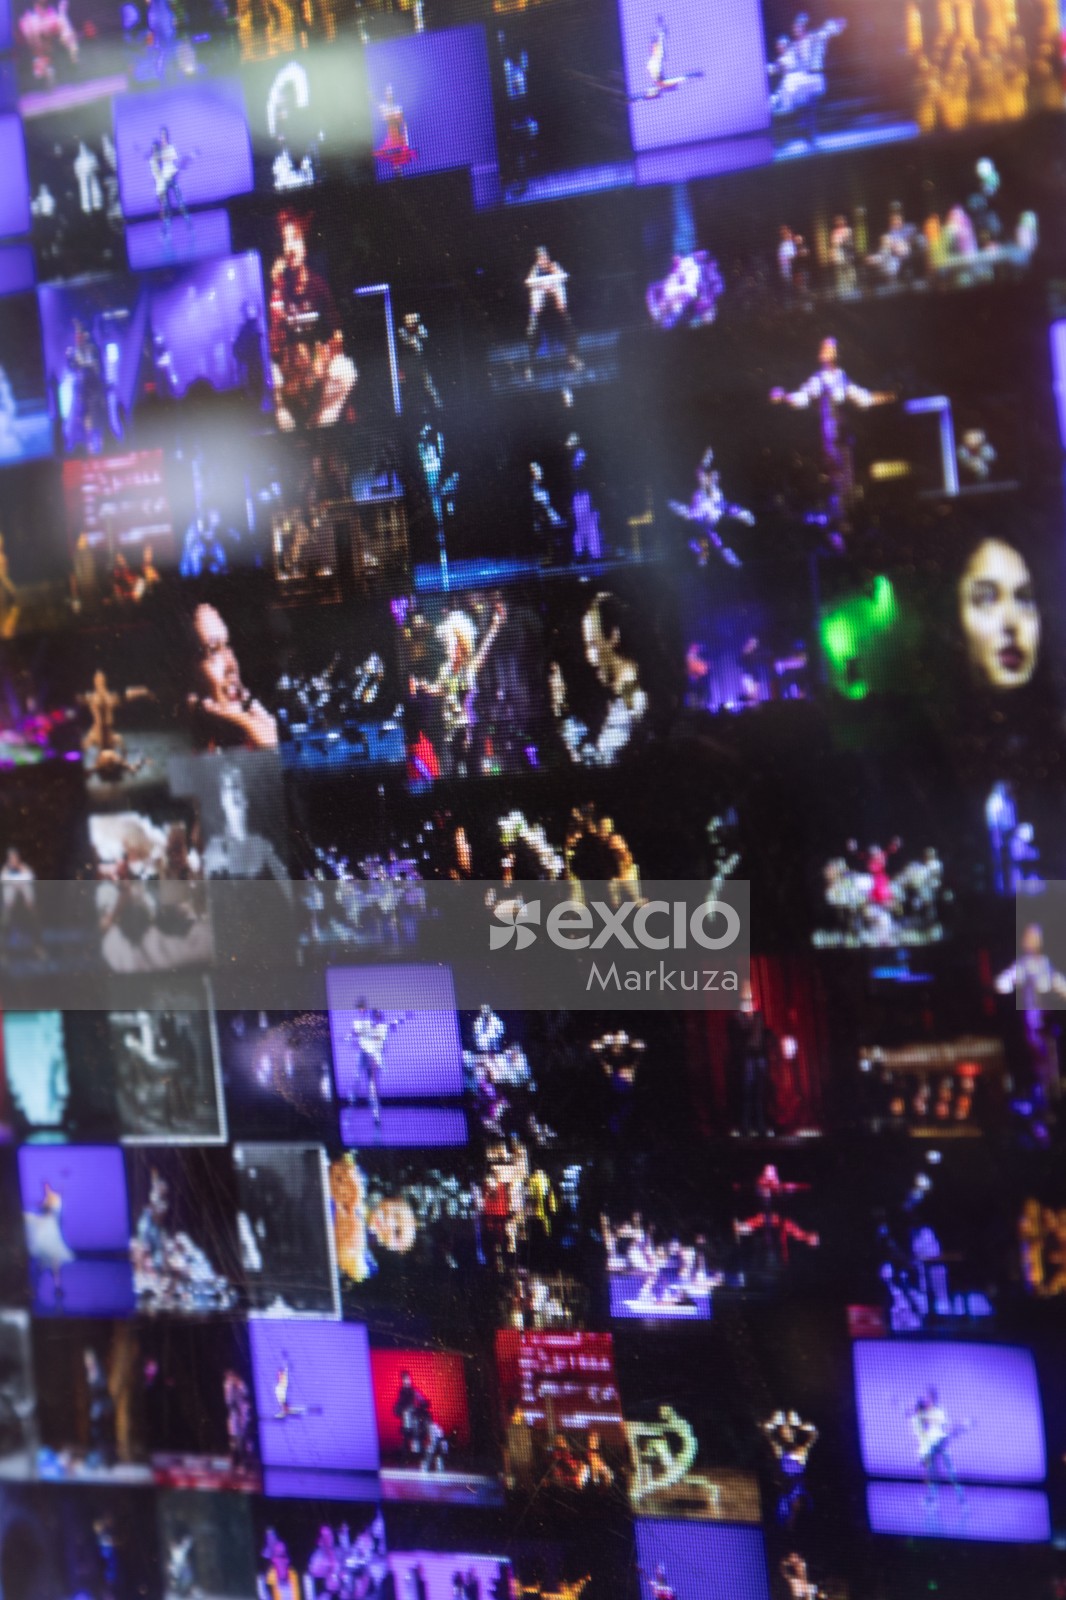 Collage of artistic performances on a screen